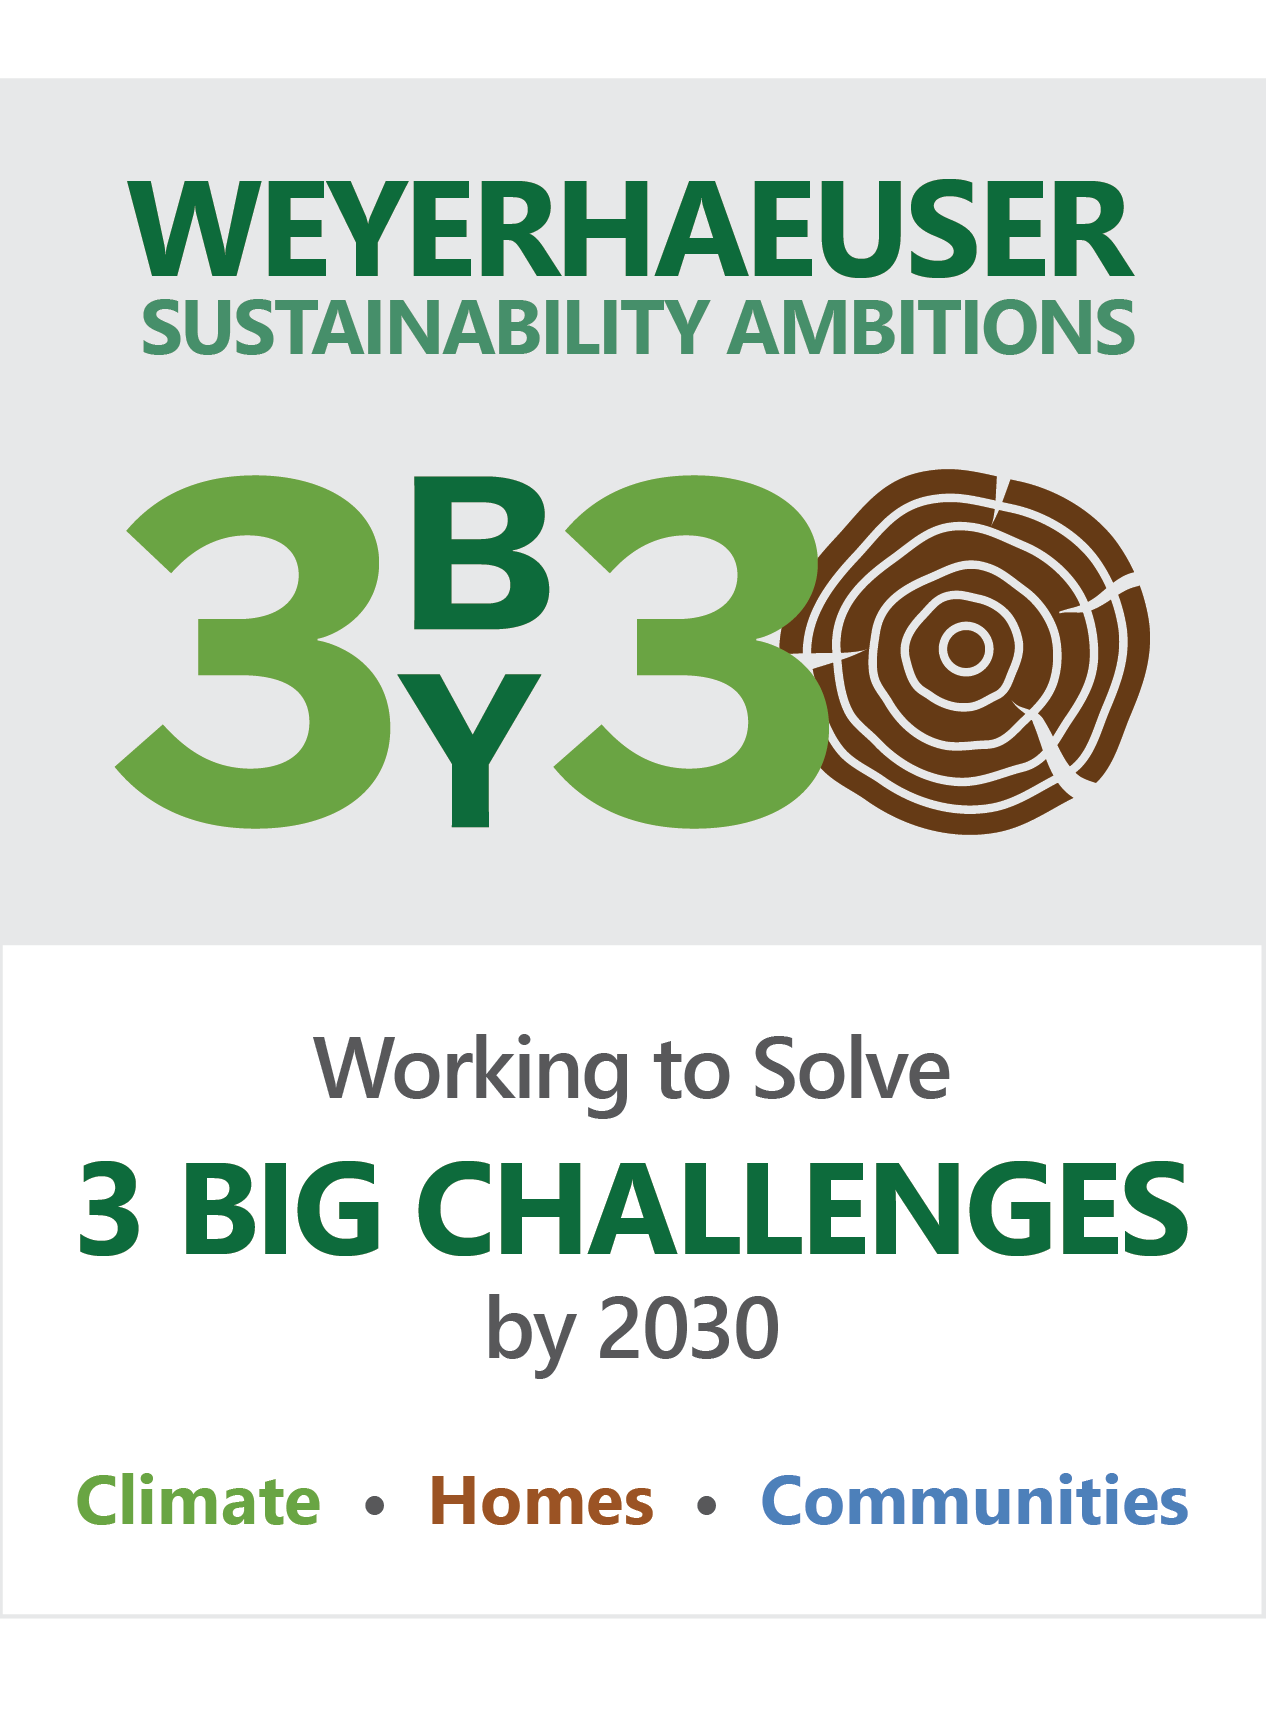 3 by 30 Logo: Ƶ Sustainability Ambitions